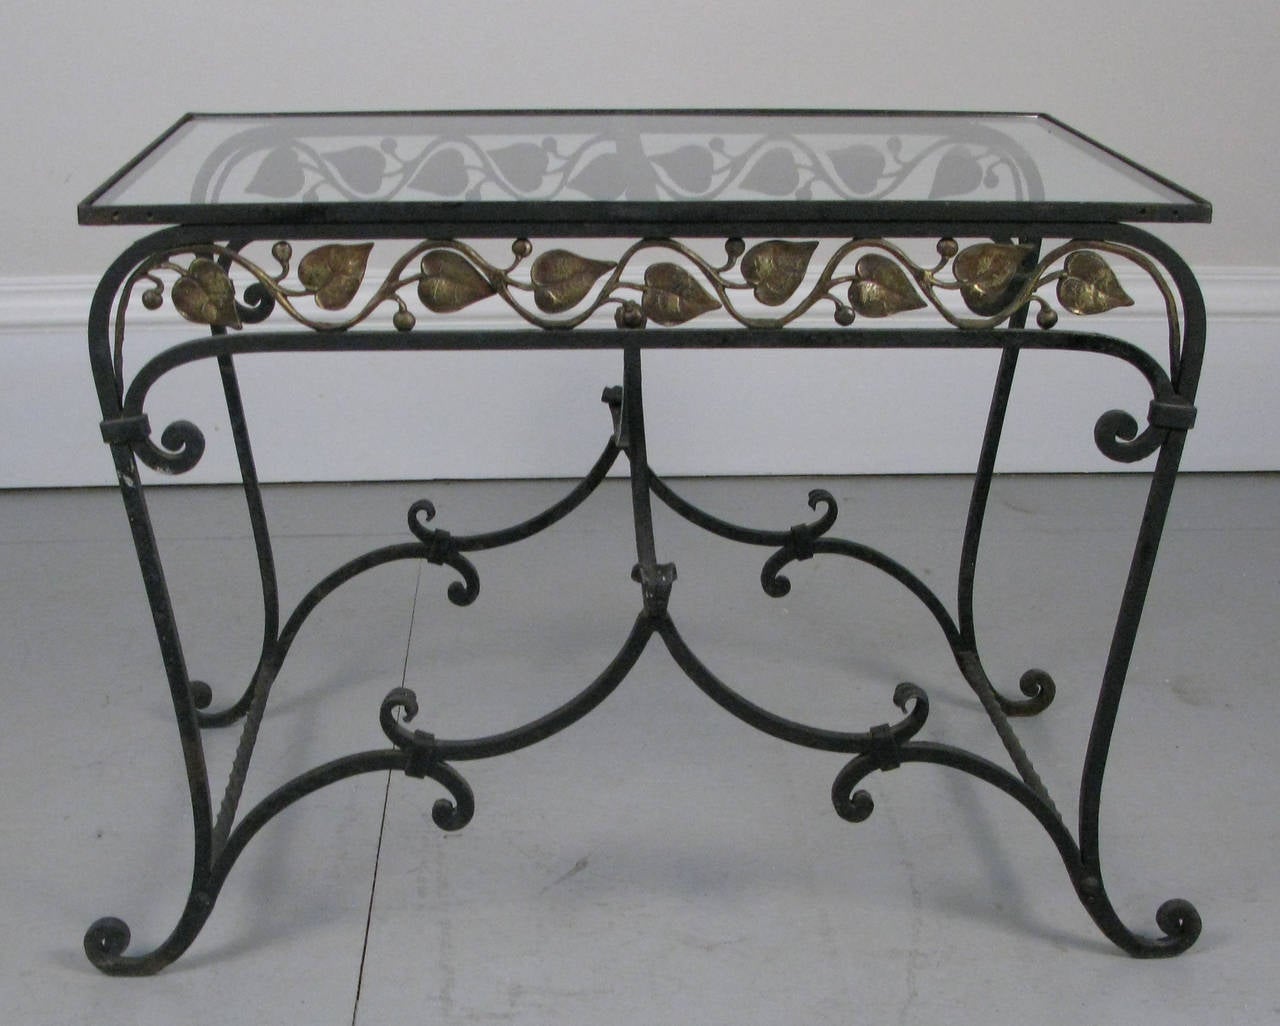 A great looking wrought iron side or coffee table. The table is finely made beautifully designed. The table appears to have been used indoors or under cover of a porch.